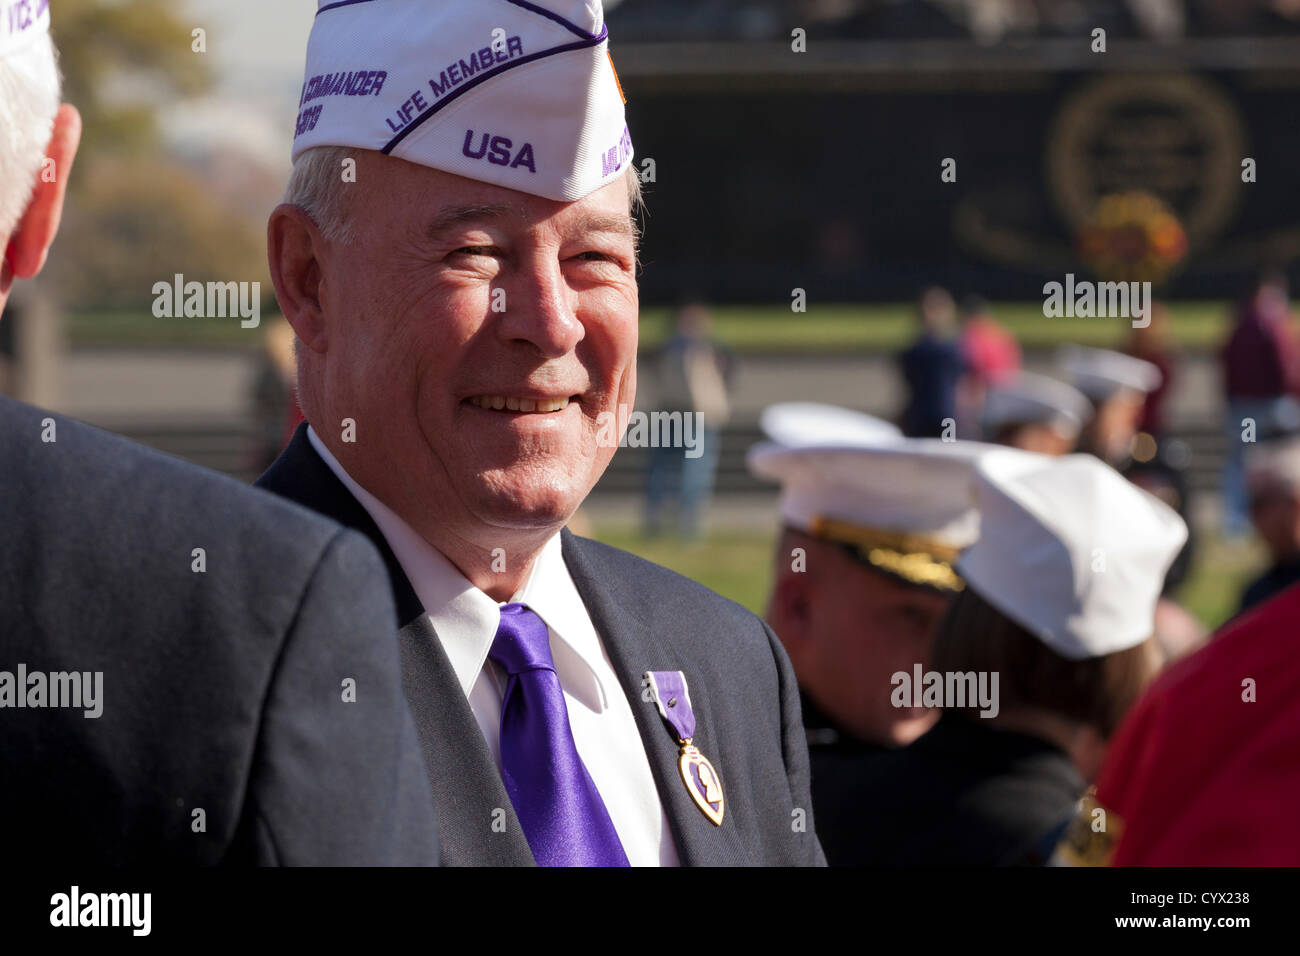 November 10, 2012: A US Marine Corps veteran and recipient of the Purple Heart, smiles after the Veterans Day celebrations at the Iwo Jima War Memorial - Washington, DC USA Stock Photo